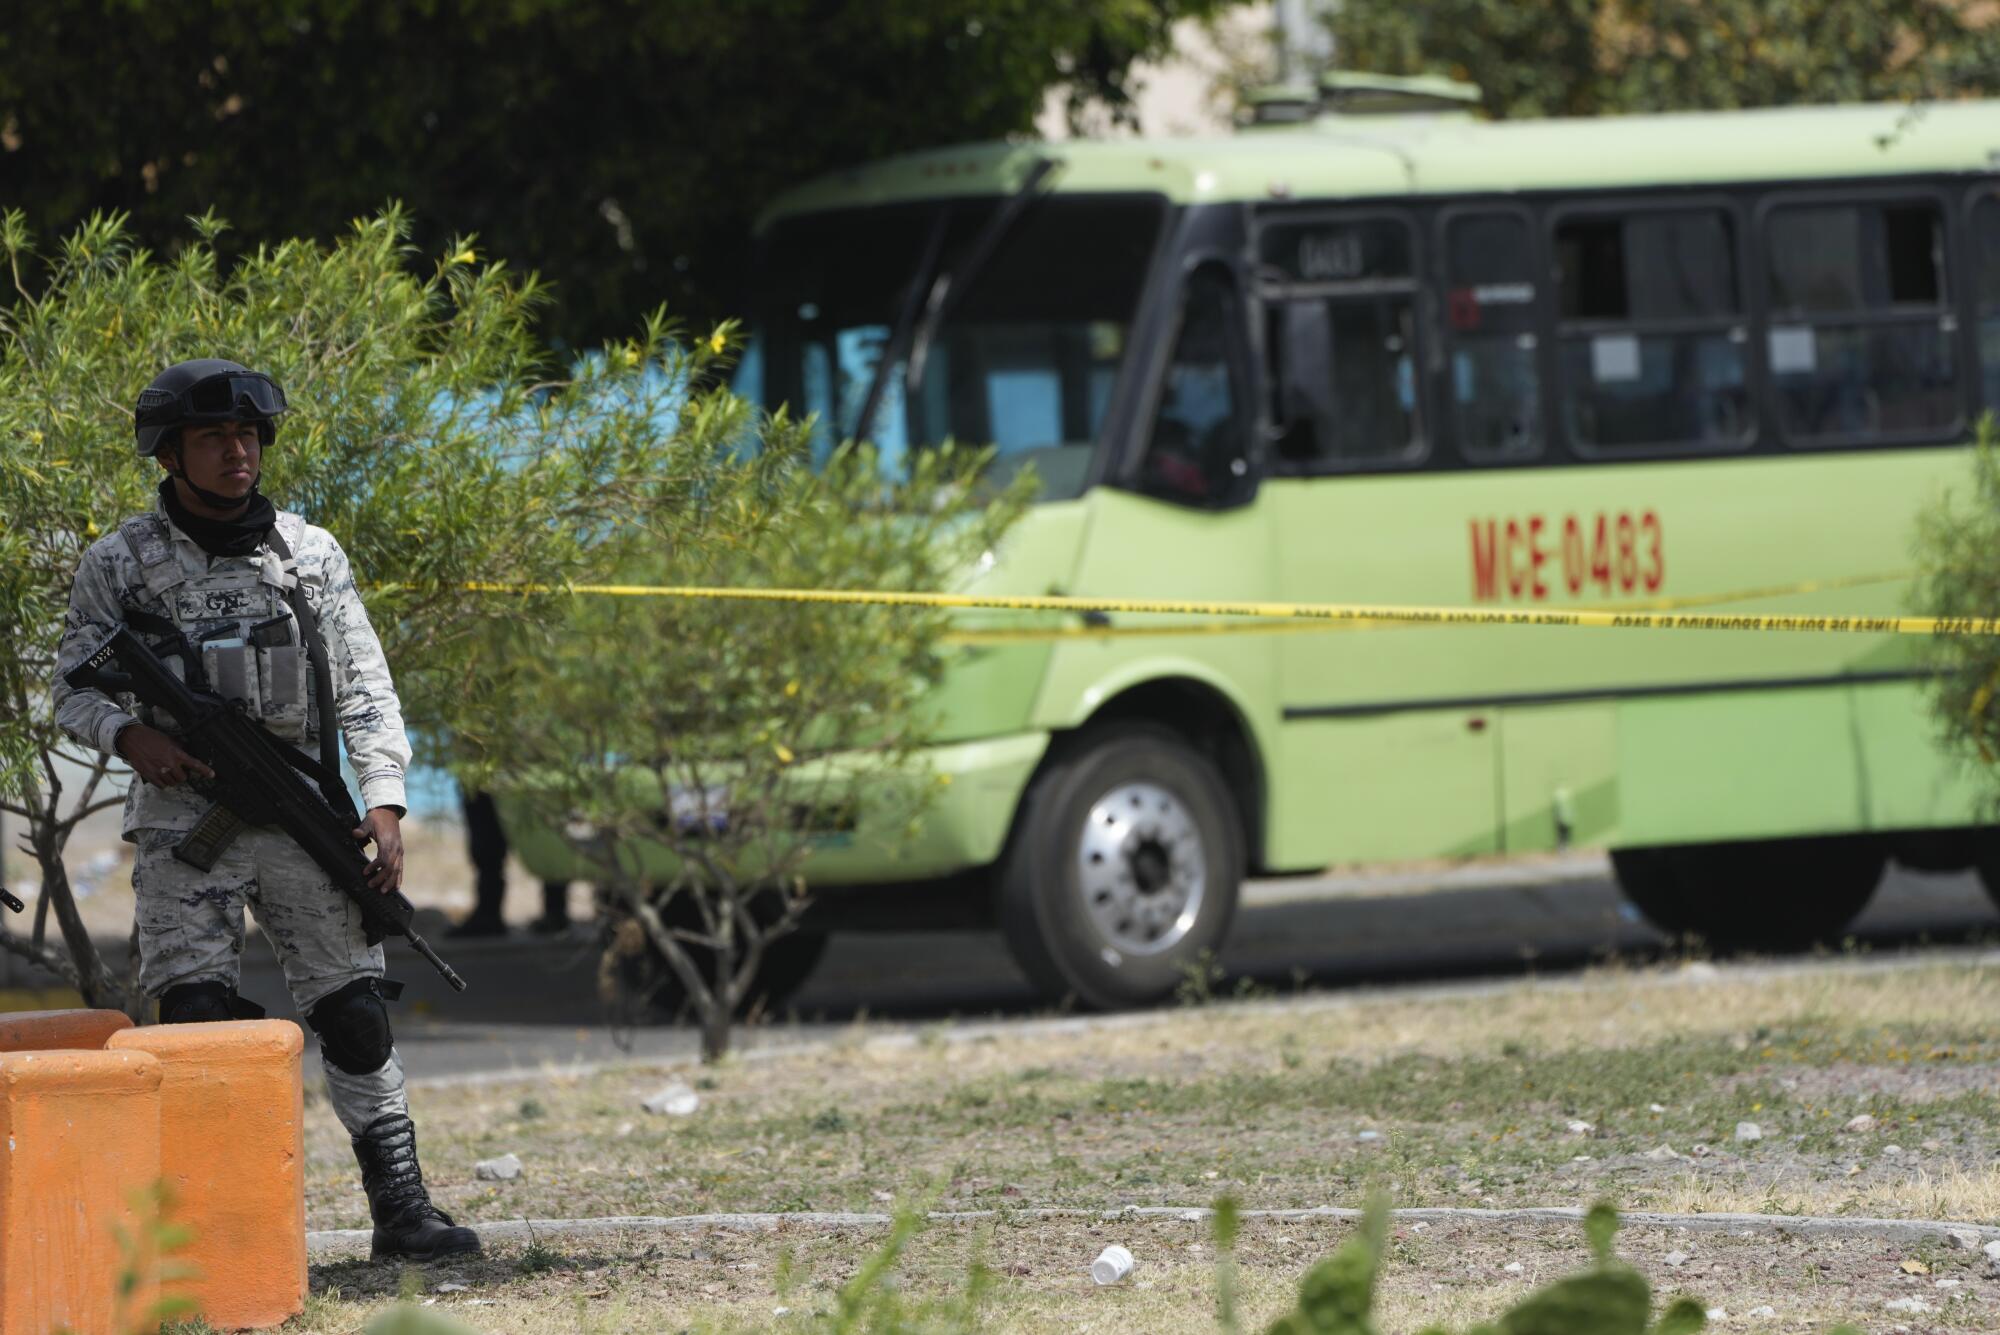 A member of the Mexican National Guard stands at the perimeter of a crime scene with a bus in the background.